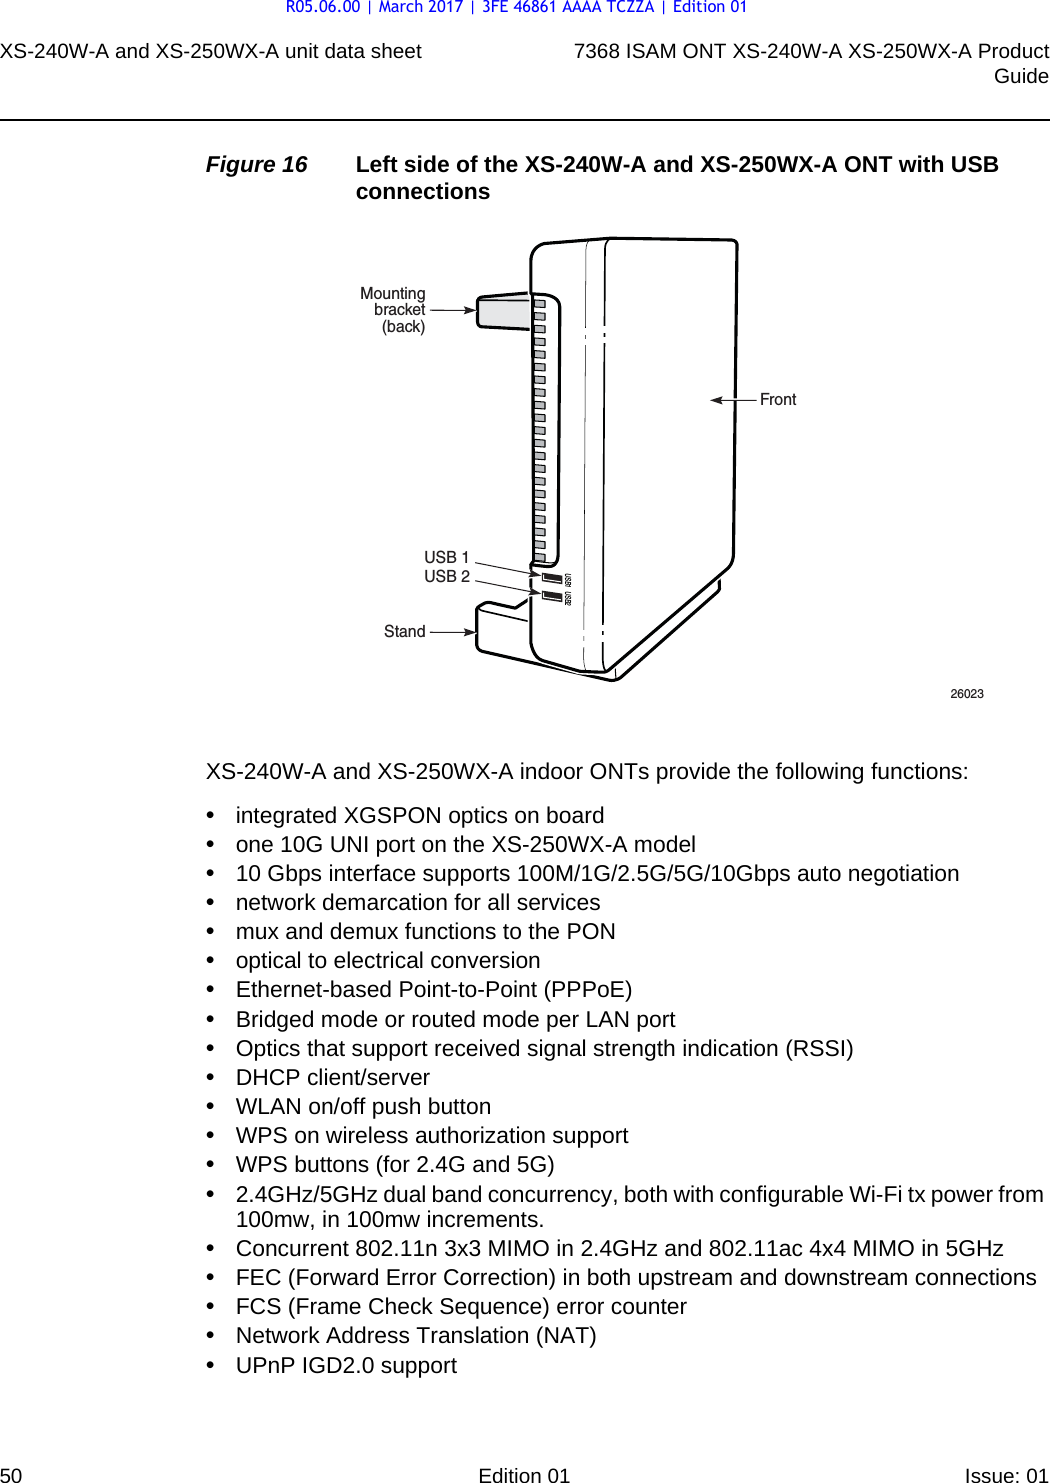 XS-240W-A and XS-250WX-A unit data sheet507368 ISAM ONT XS-240W-A XS-250WX-A ProductGuideEdition 01 Issue: 01 Figure 16 Left side of the XS-240W-A and XS-250WX-A ONT with USB connectionsXS-240W-A and XS-250WX-A indoor ONTs provide the following functions:•integrated XGSPON optics on board•one 10G UNI port on the XS-250WX-A model•10 Gbps interface supports 100M/1G/2.5G/5G/10Gbps auto negotiation•network demarcation for all services•mux and demux functions to the PON•optical to electrical conversion•Ethernet-based Point-to-Point (PPPoE)•Bridged mode or routed mode per LAN port•Optics that support received signal strength indication (RSSI)•DHCP client/server•WLAN on/off push button•WPS on wireless authorization support•WPS buttons (for 2.4G and 5G)•2.4GHz/5GHz dual band concurrency, both with configurable Wi-Fi tx power from 100mw, in 100mw increments.•Concurrent 802.11n 3x3 MIMO in 2.4GHz and 802.11ac 4x4 MIMO in 5GHz•FEC (Forward Error Correction) in both upstream and downstream connections•FCS (Frame Check Sequence) error counter•Network Address Translation (NAT)•UPnP IGD2.0 supportUSB 1USB 2StandMountingbracket(back)26023USB1 USB2FrontR05.06.00 | March 2017 | 3FE 46861 AAAA TCZZA | Edition 01